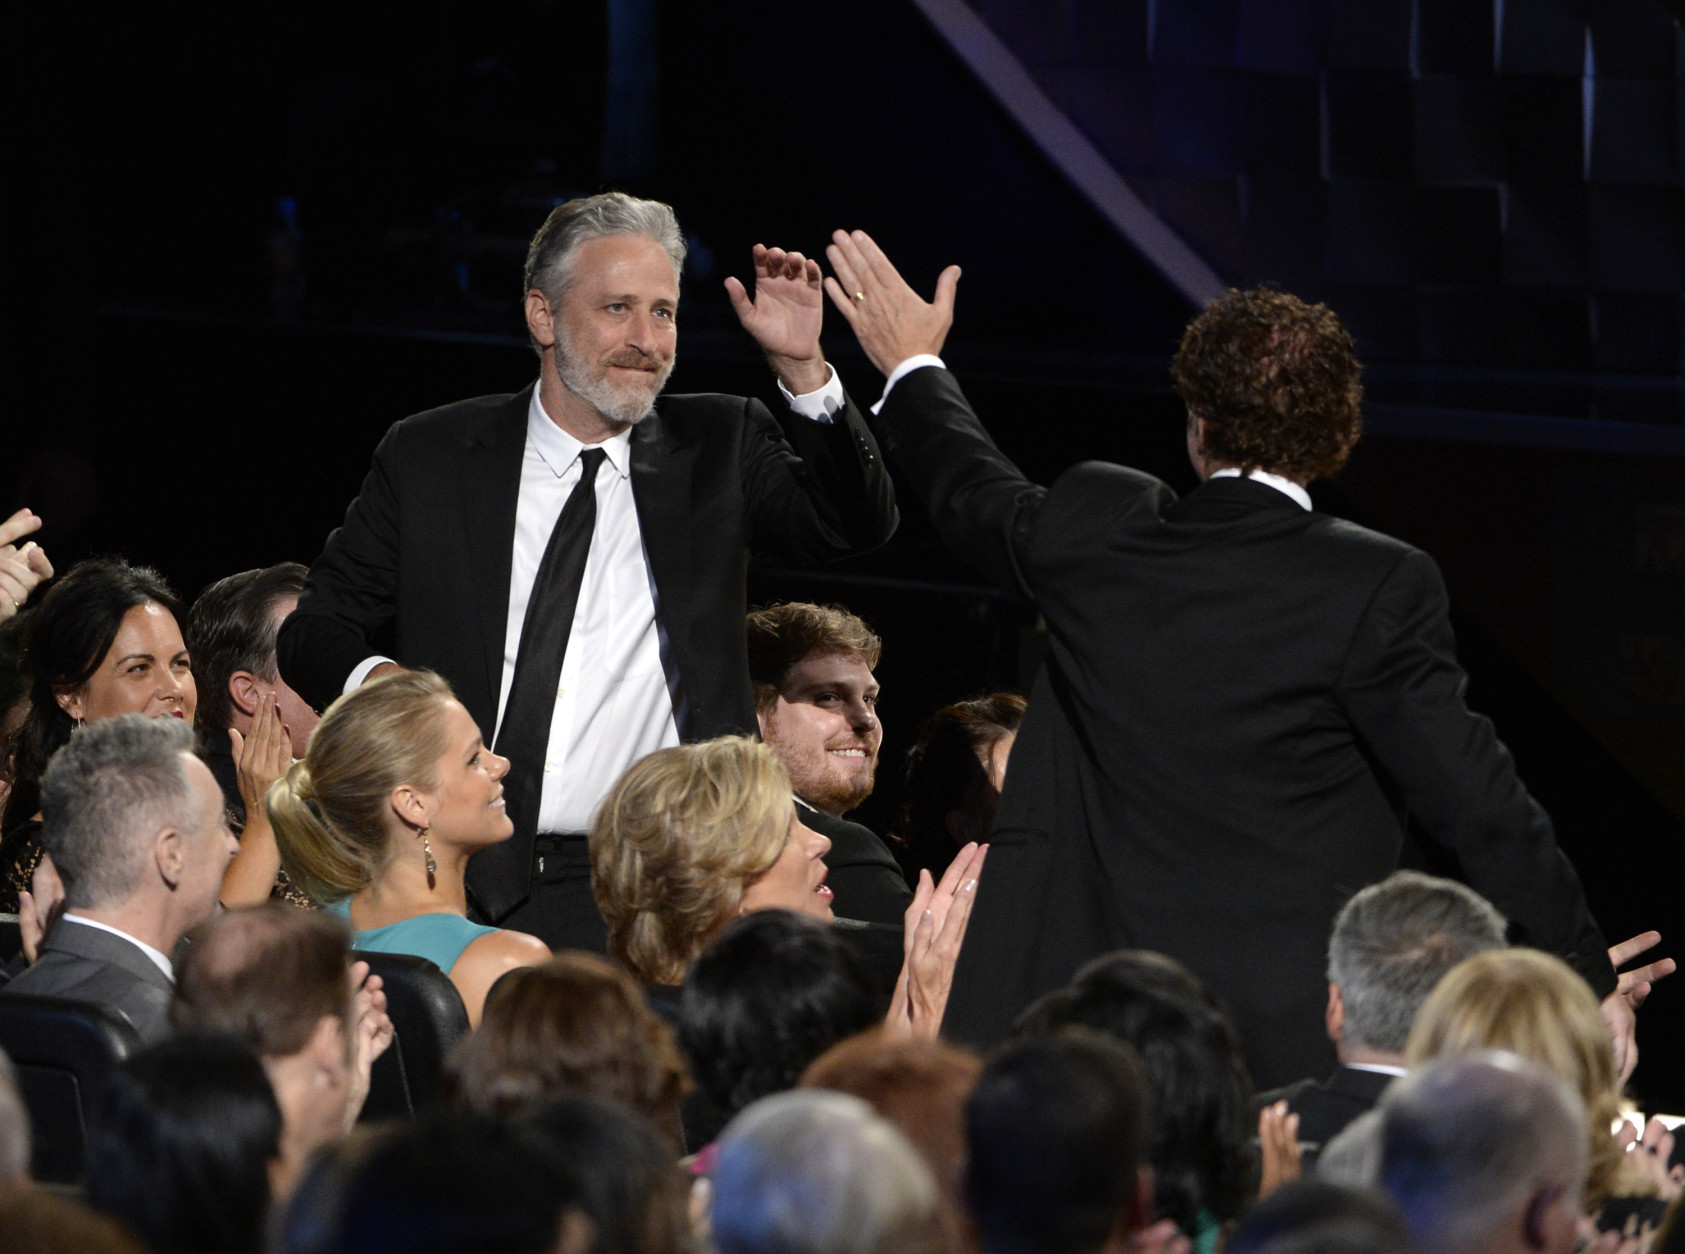 Jon Stewart gives Chuck O'Neil a high five at the 67th Primetime Emmy Awards on Sunday, Sept. 20, 2015, at the Microsoft Theater in Los Angeles. (Photo by Phil McCarten/Invision for the Television Academy/AP Images)